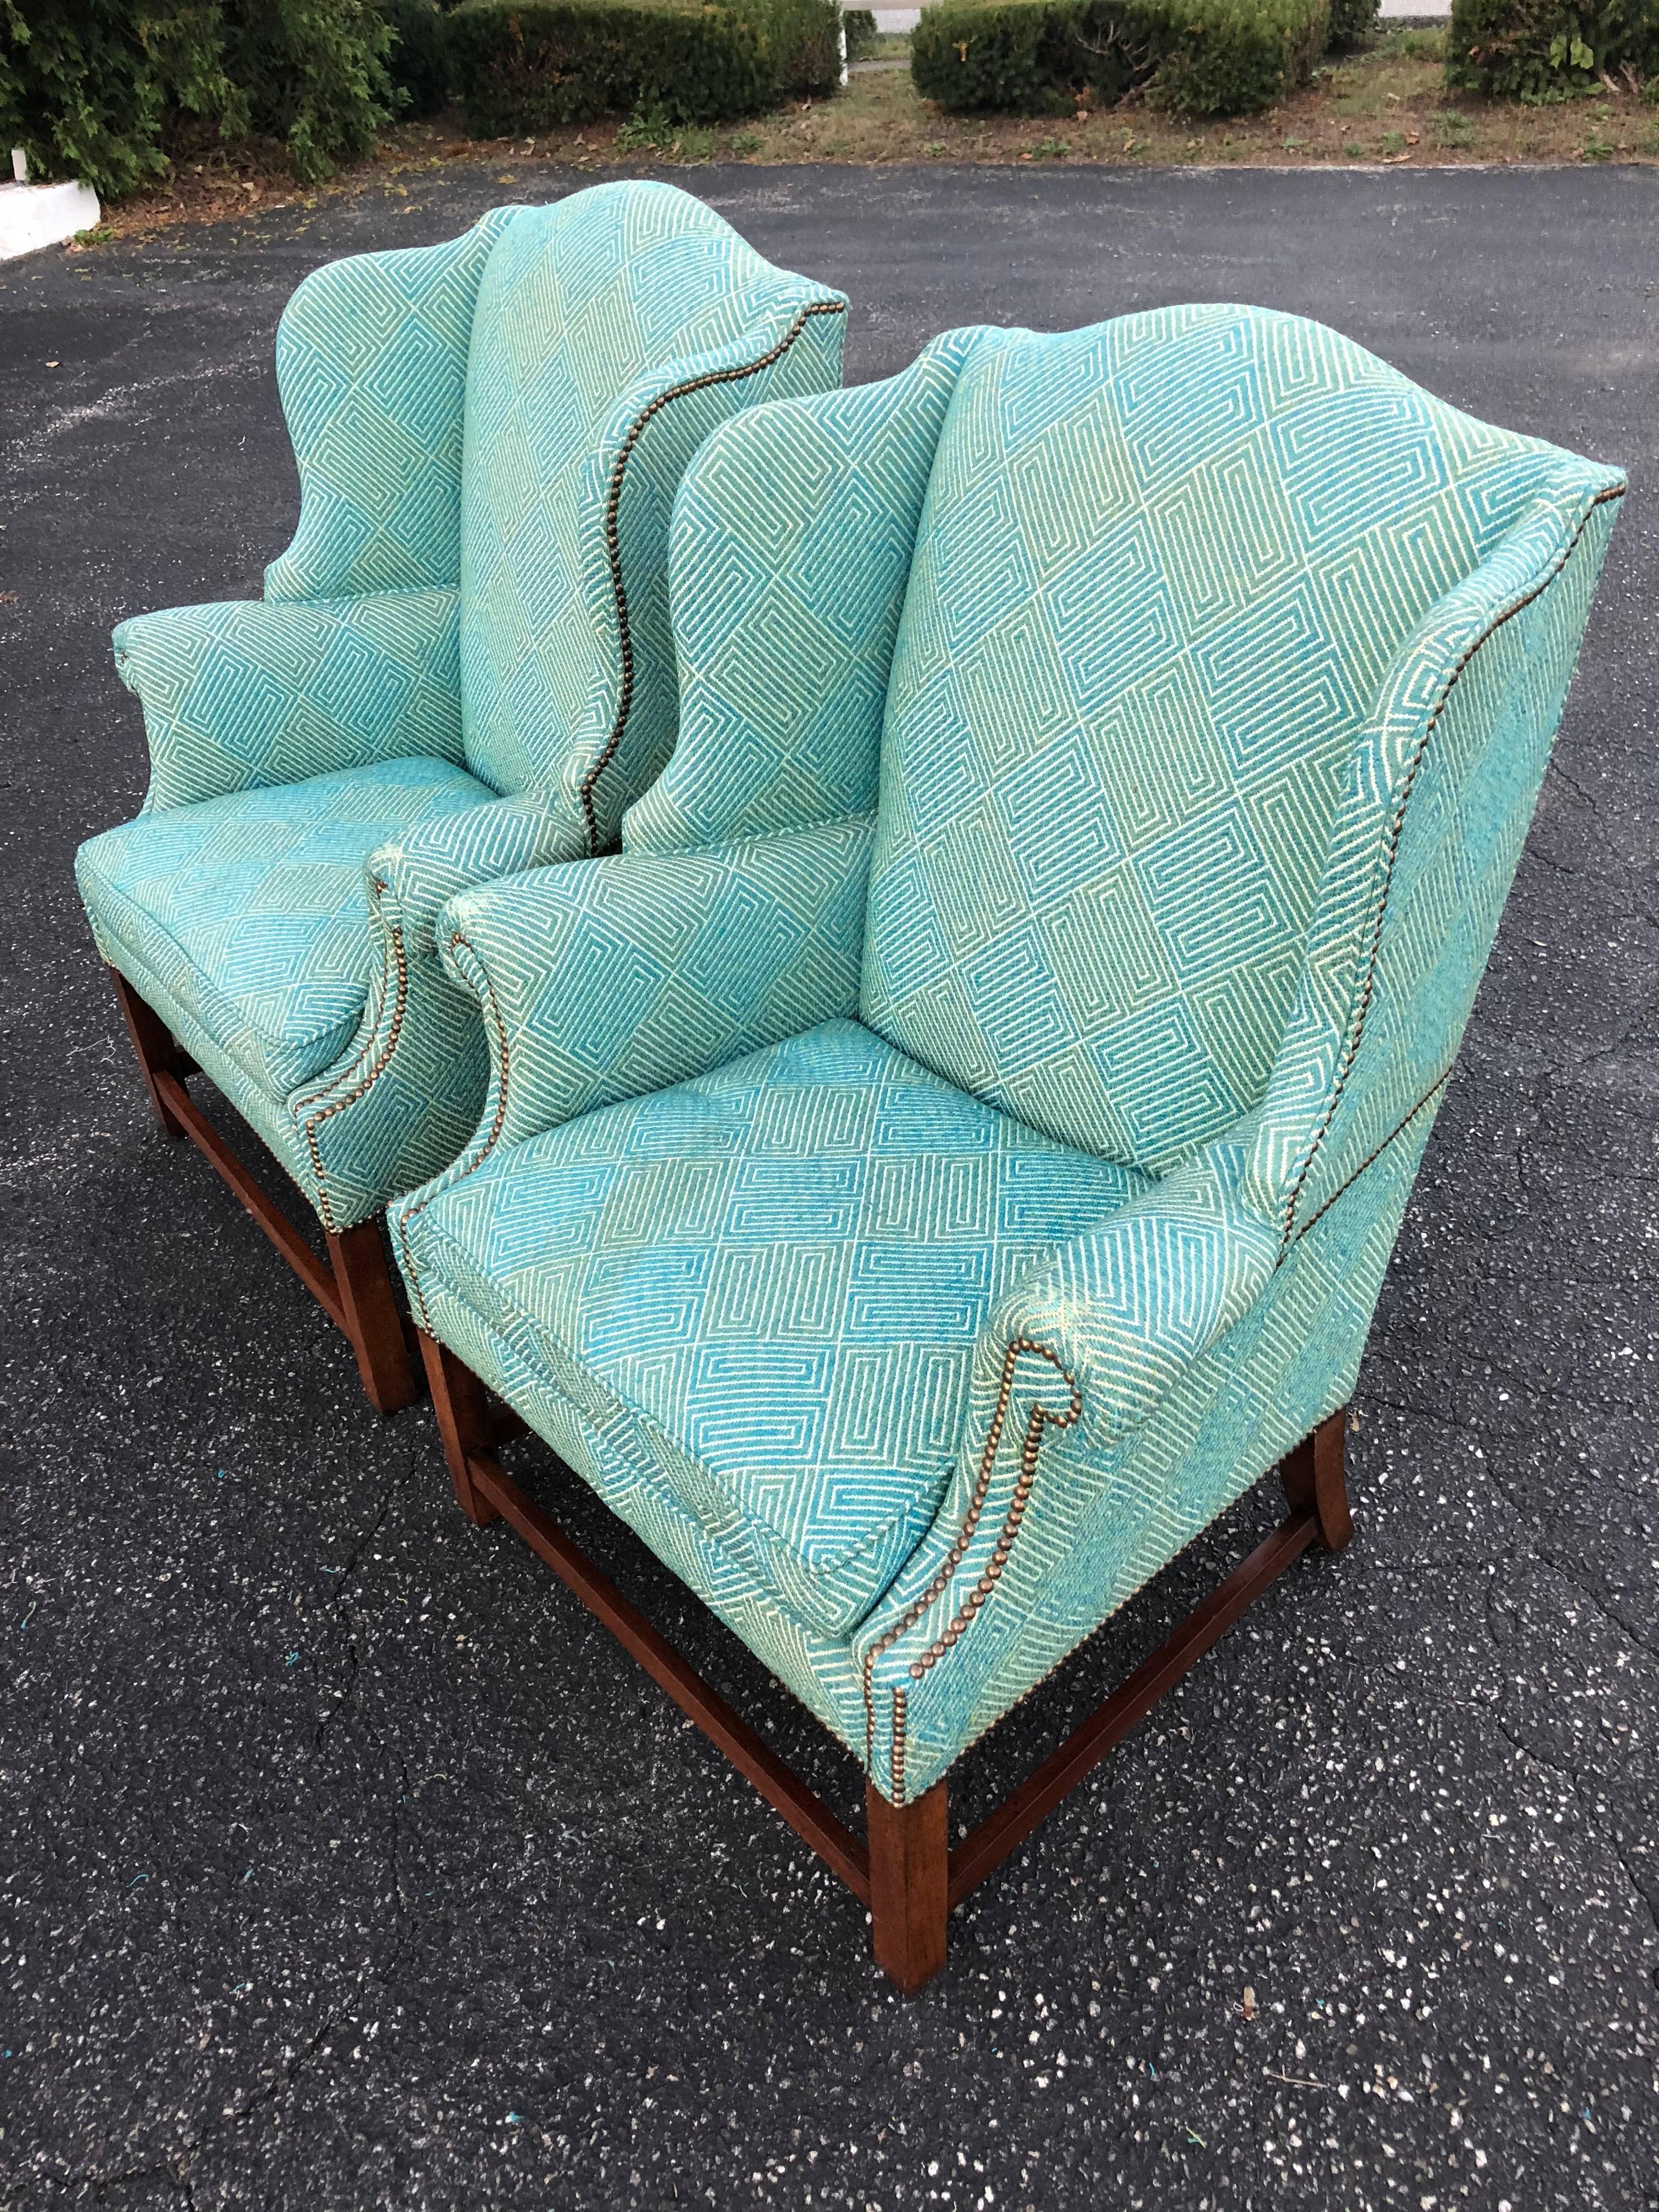 Pair of Henredon Wing Back Chairs in Turquoise. Fabulous fabric, just worn at arm rest ends. All brass tacks have been replaced. Strong and structurally sound.